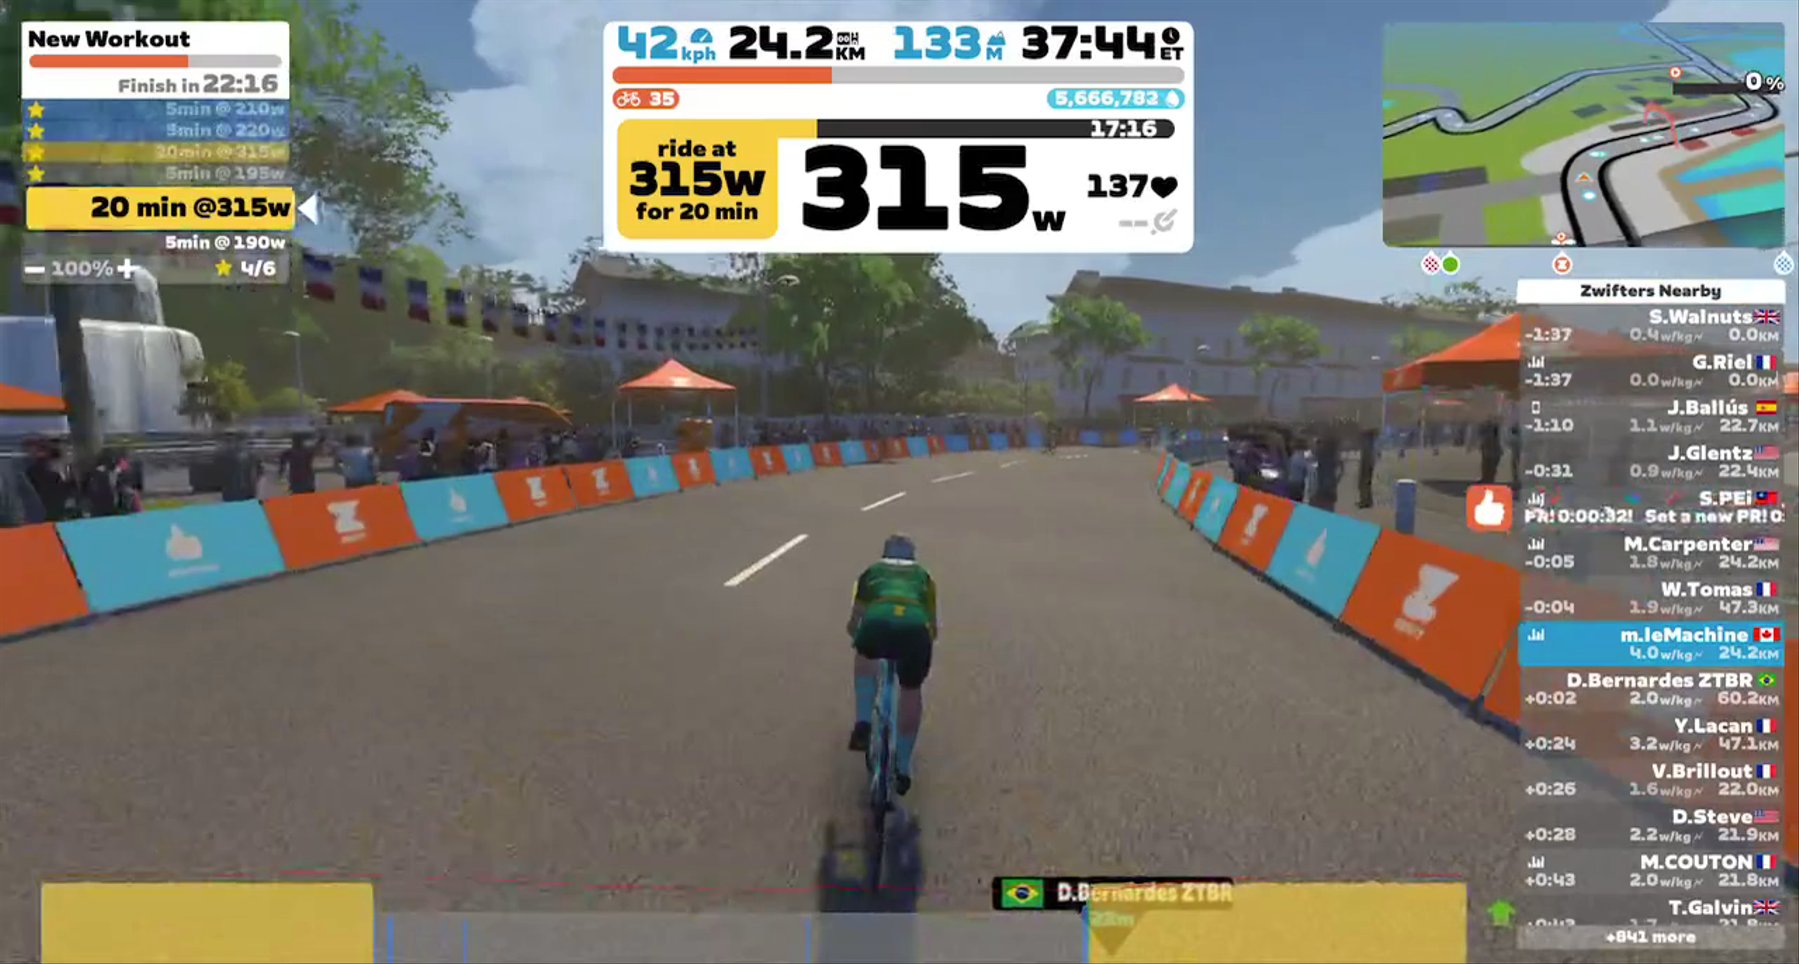 Zwift - New Workout in France